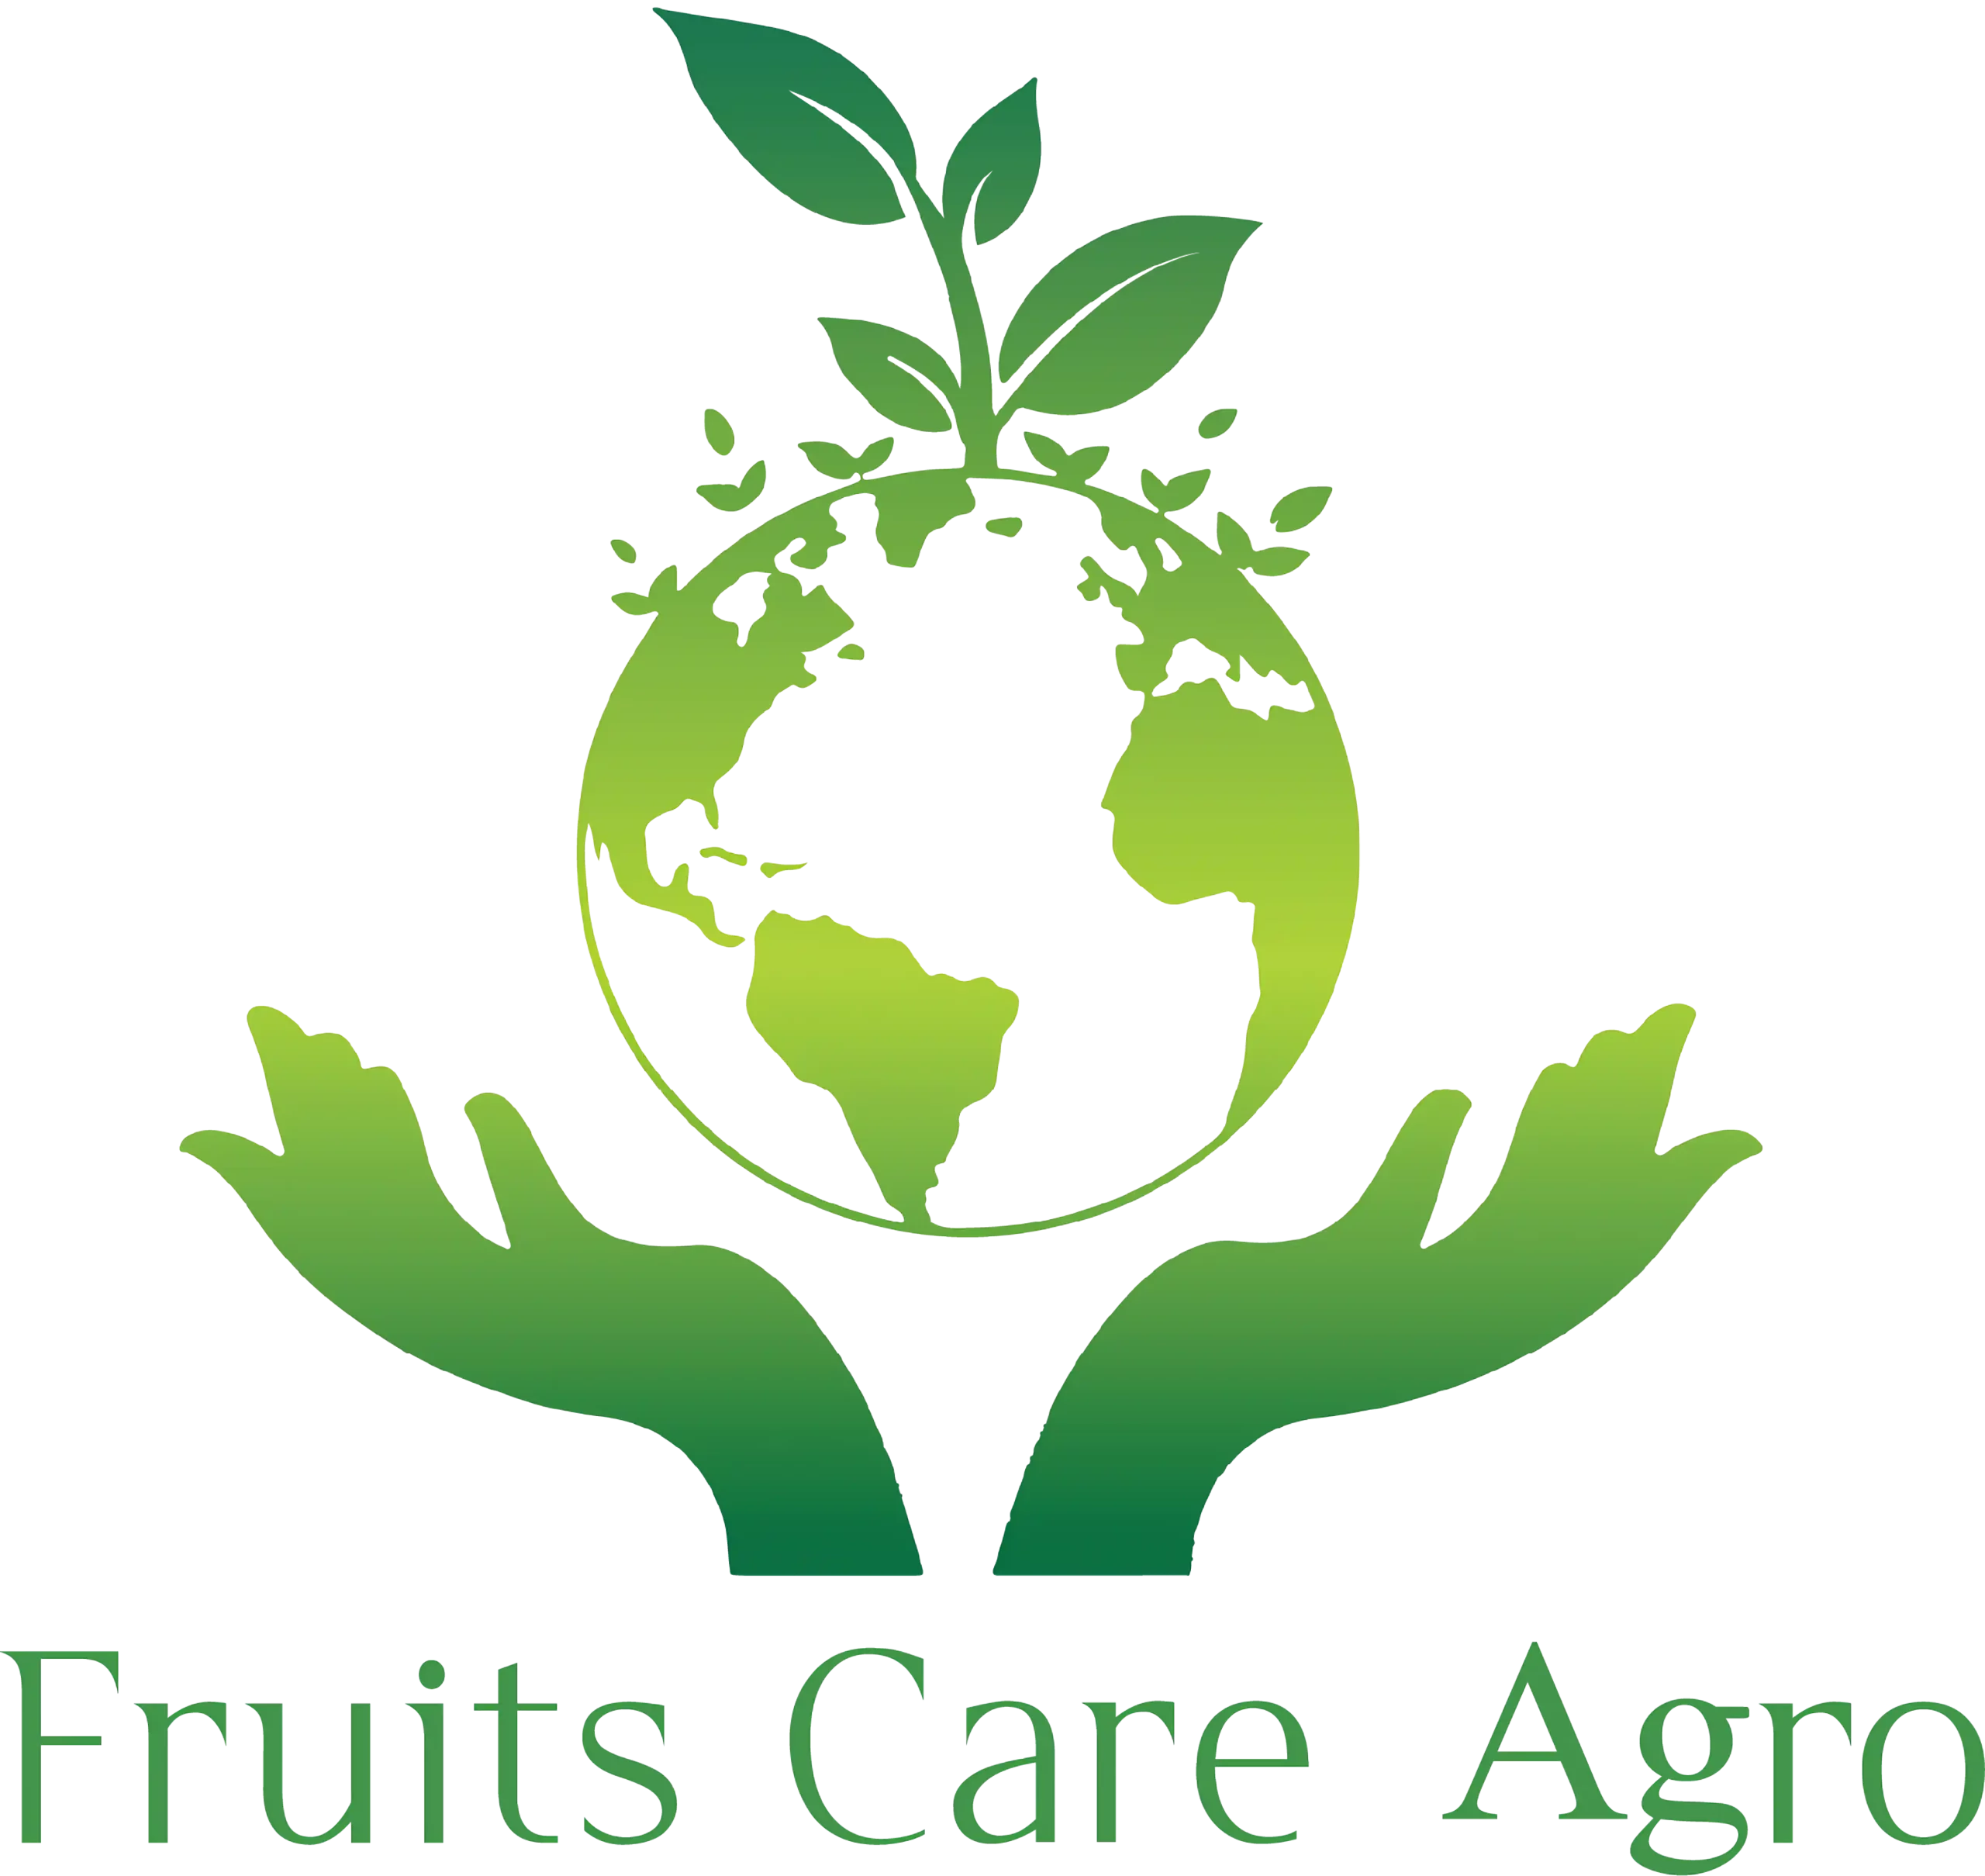 Fruits Care Agro